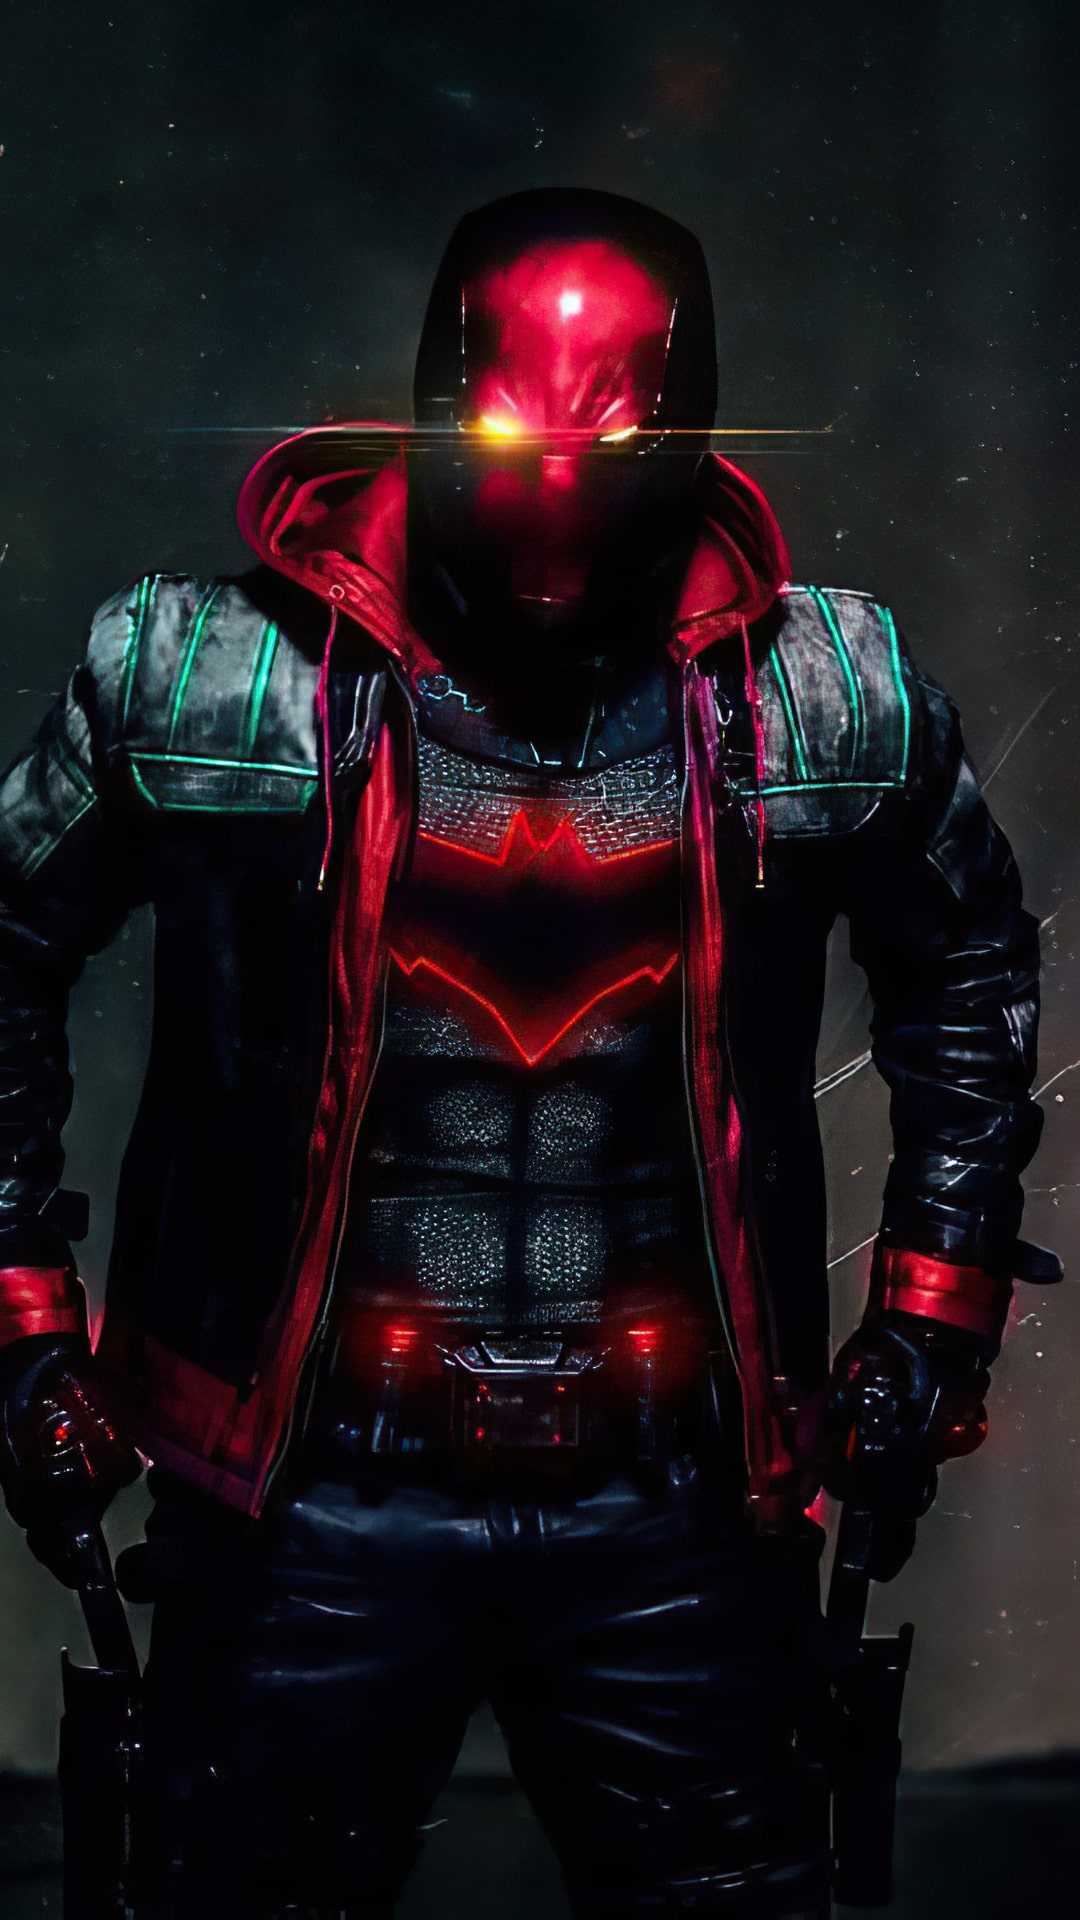 Download free HD wallpaper from above link! #RedHoodSymbol | Red hood, Red hood  wallpaper, Batman red hood